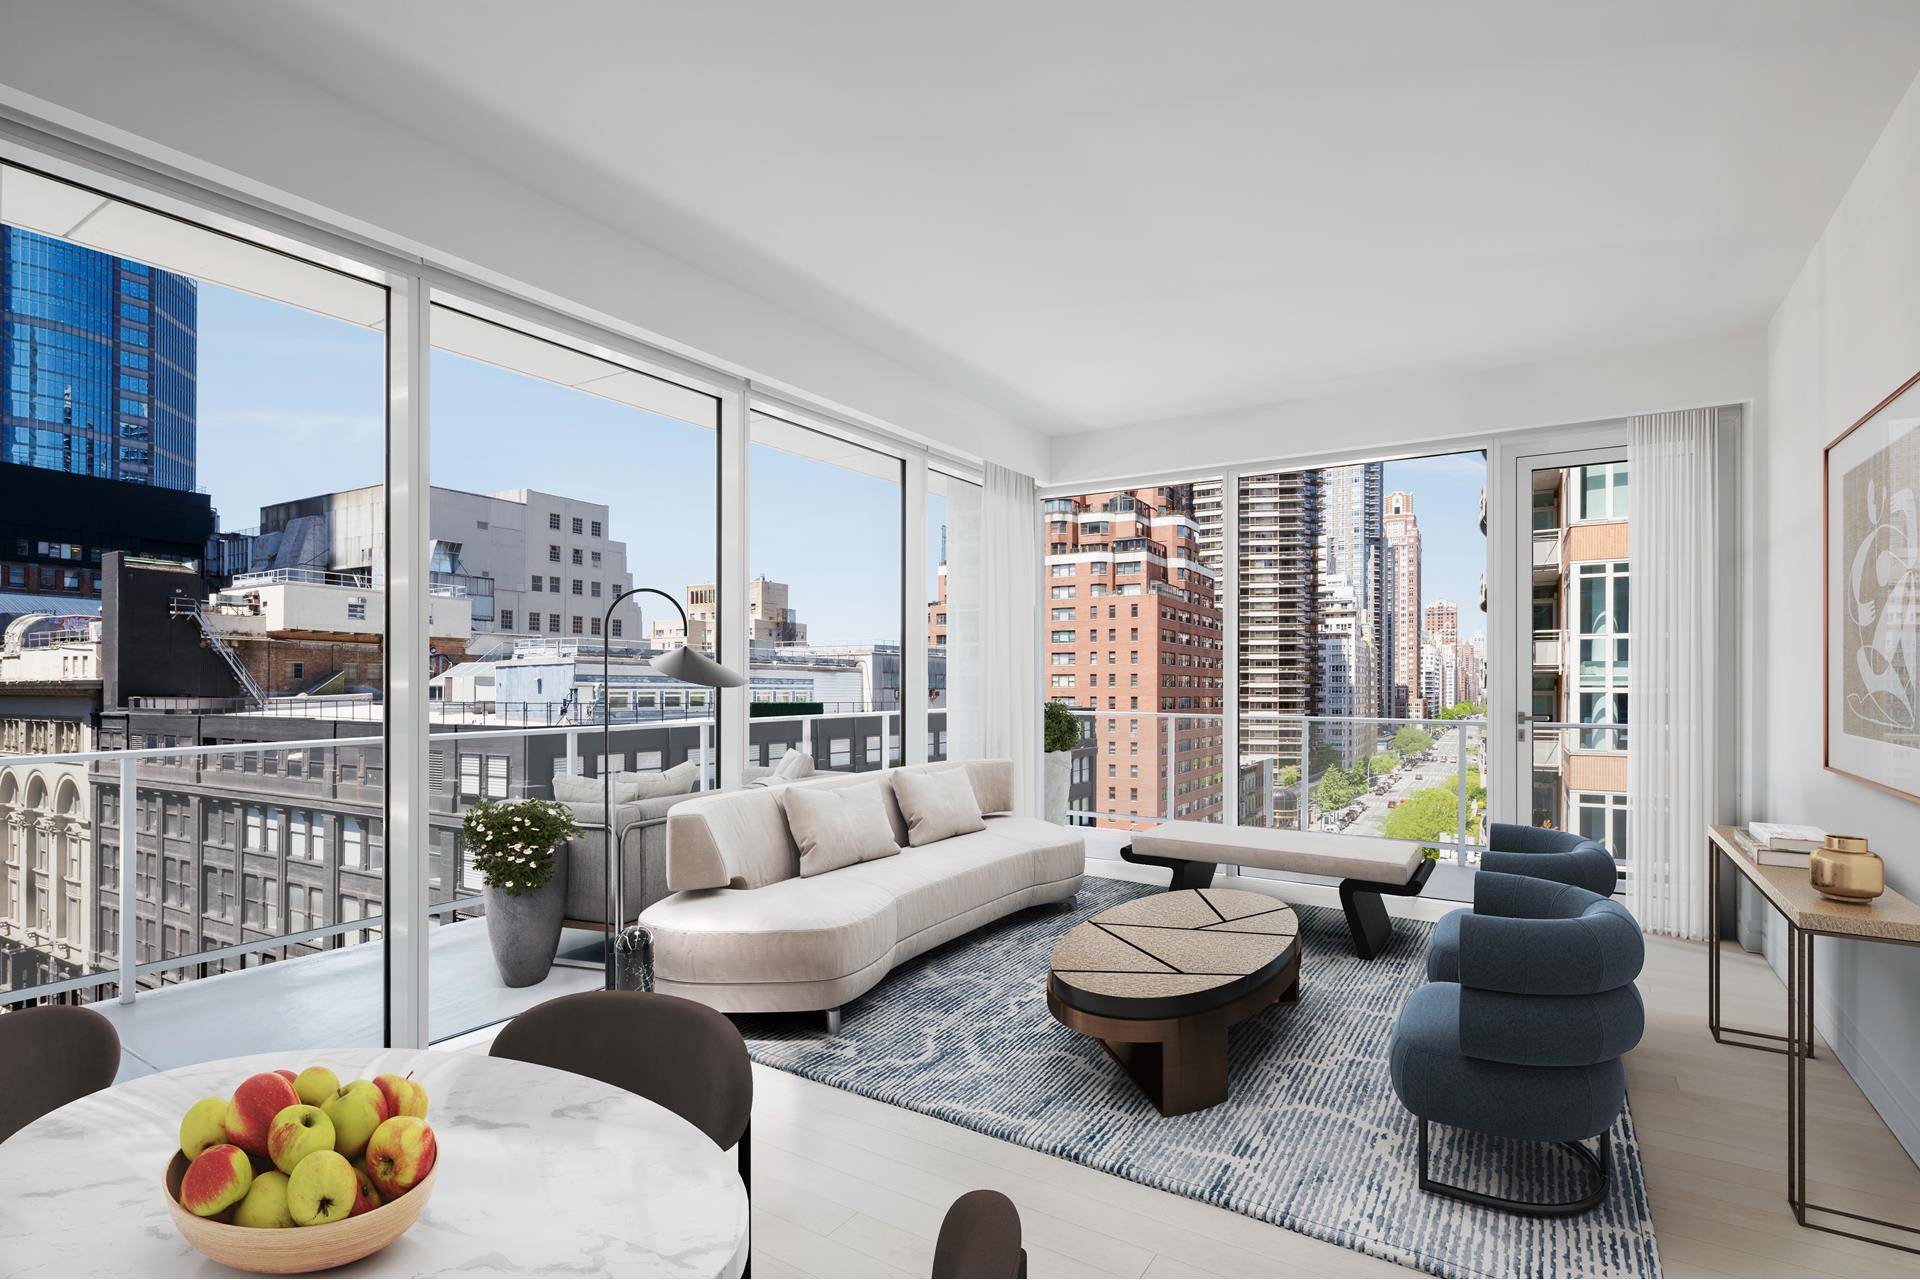 This spacious 1, 416 square foot two bedroom, two and a half bath corner residence features over 91 linear feet of wrap around terrace with northern exposures overlooking Central Park, ...